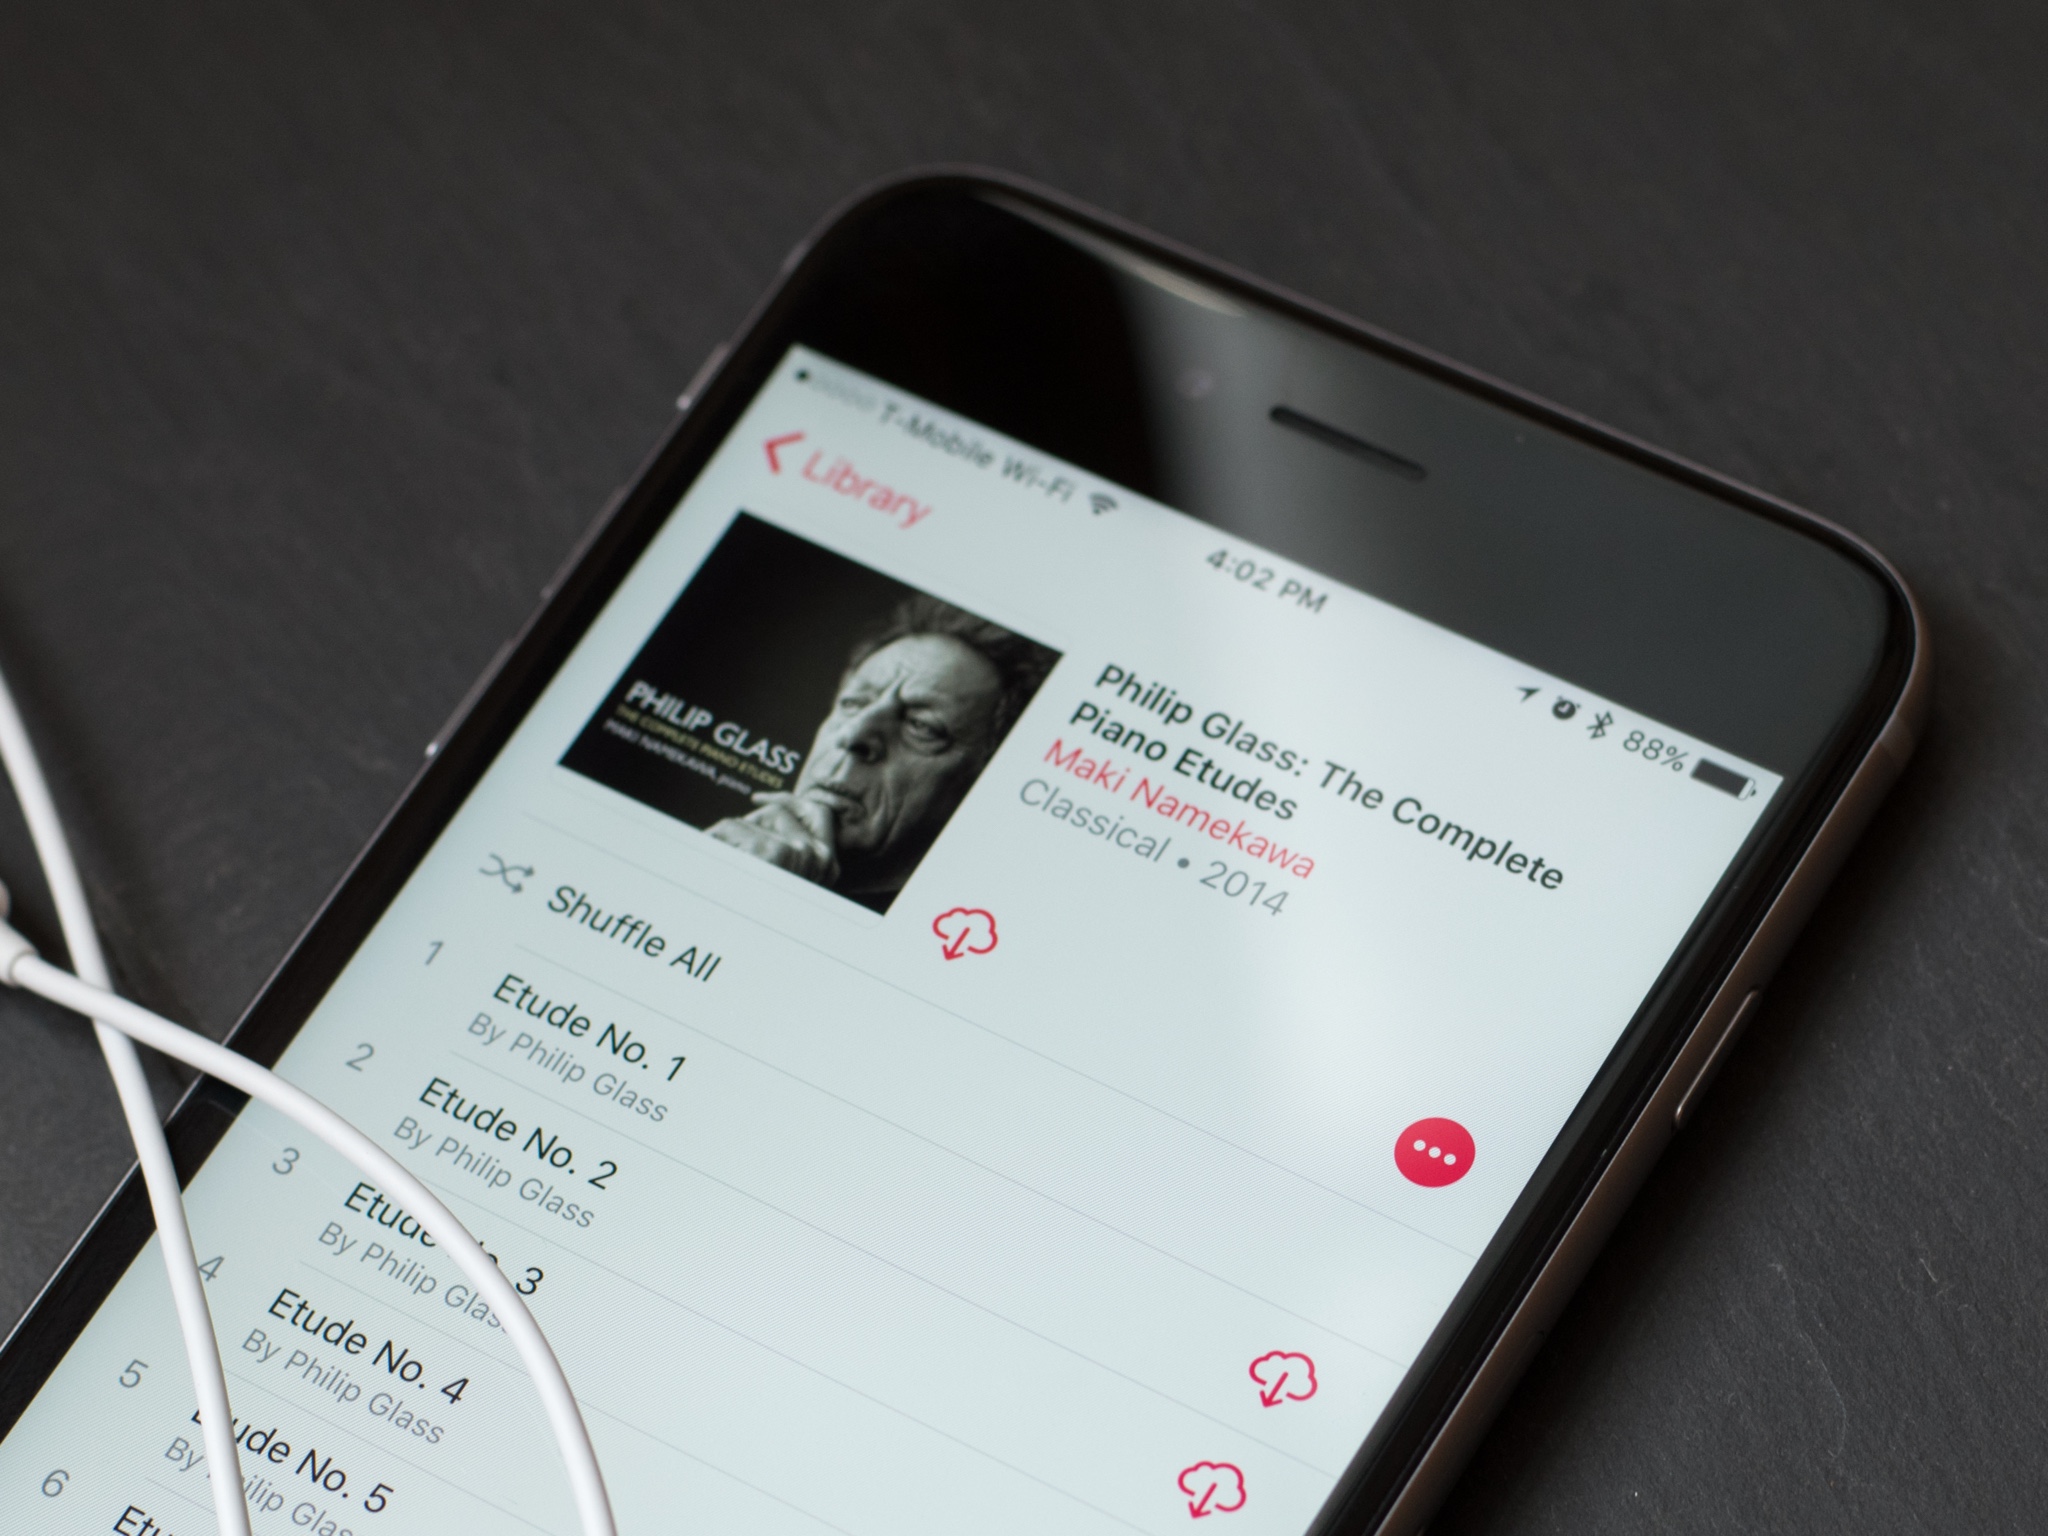 How to use optimized storage for Music in iOS 10 on your iPhone or iPad